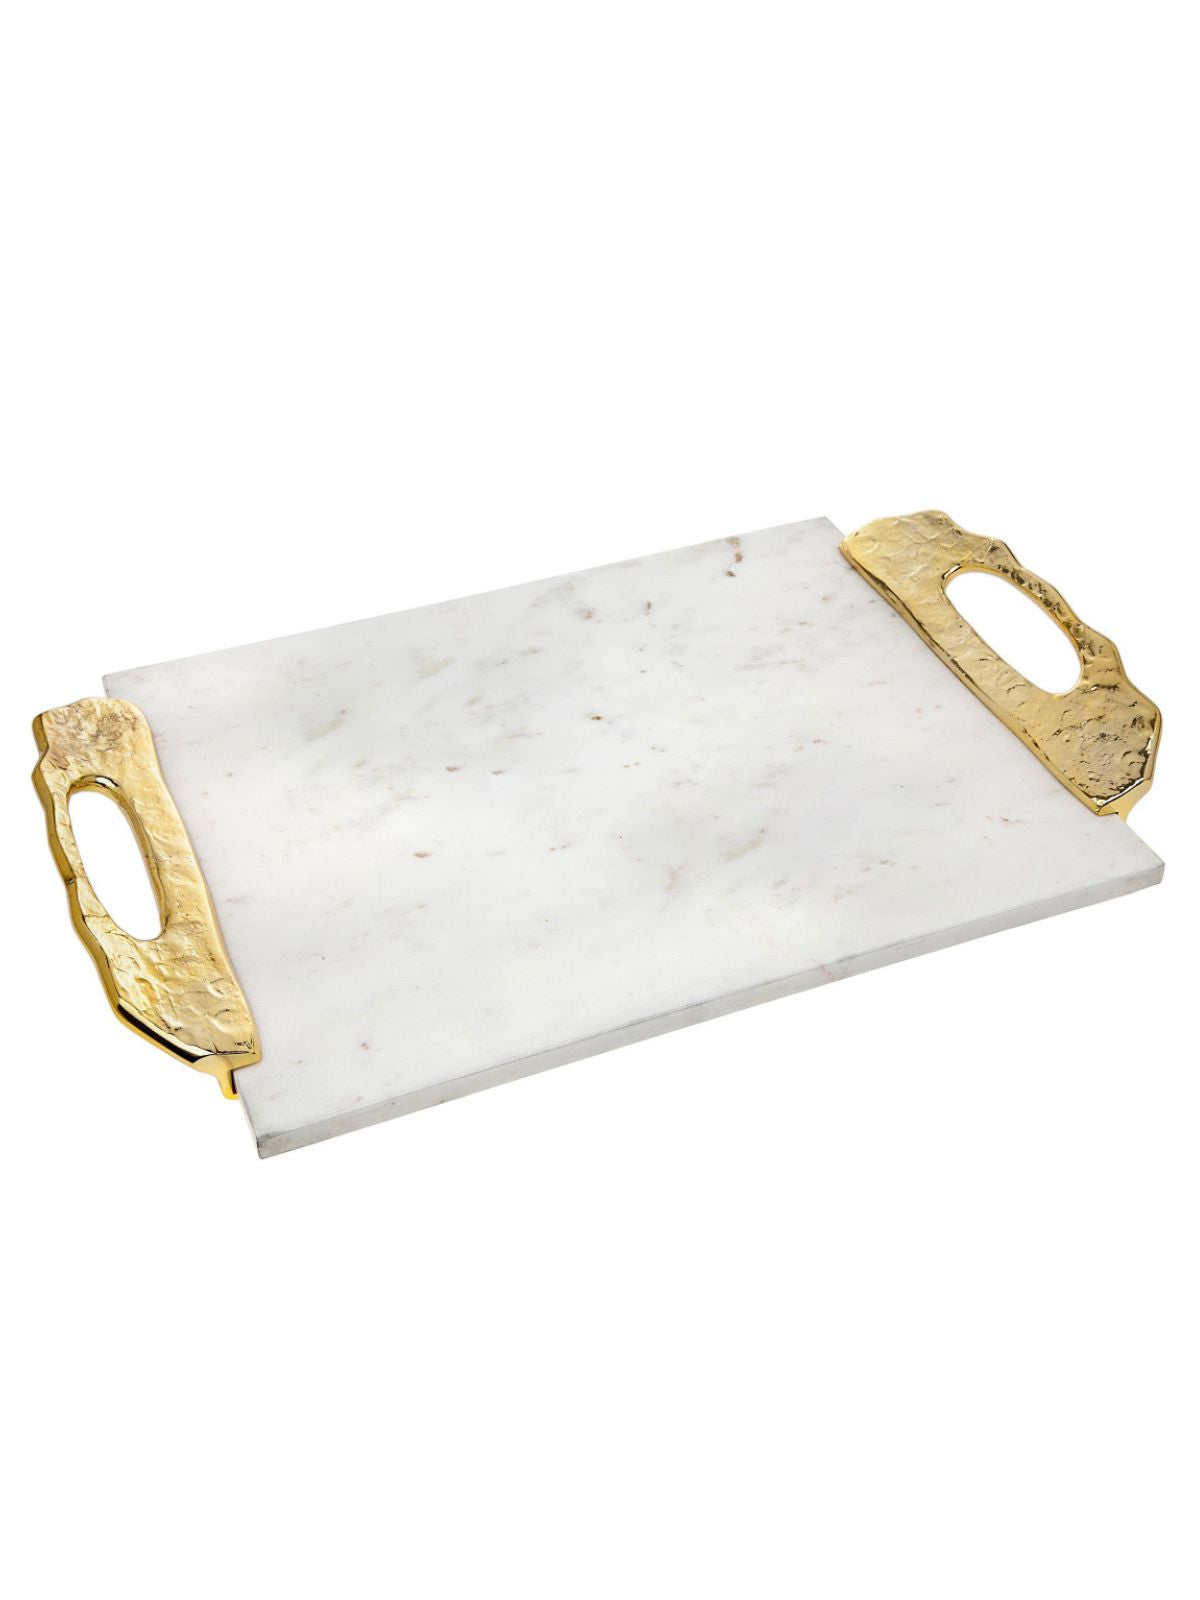 White Marble Decorative Lava Tray with Luxurious Gold Handles, 19L x 12W. 